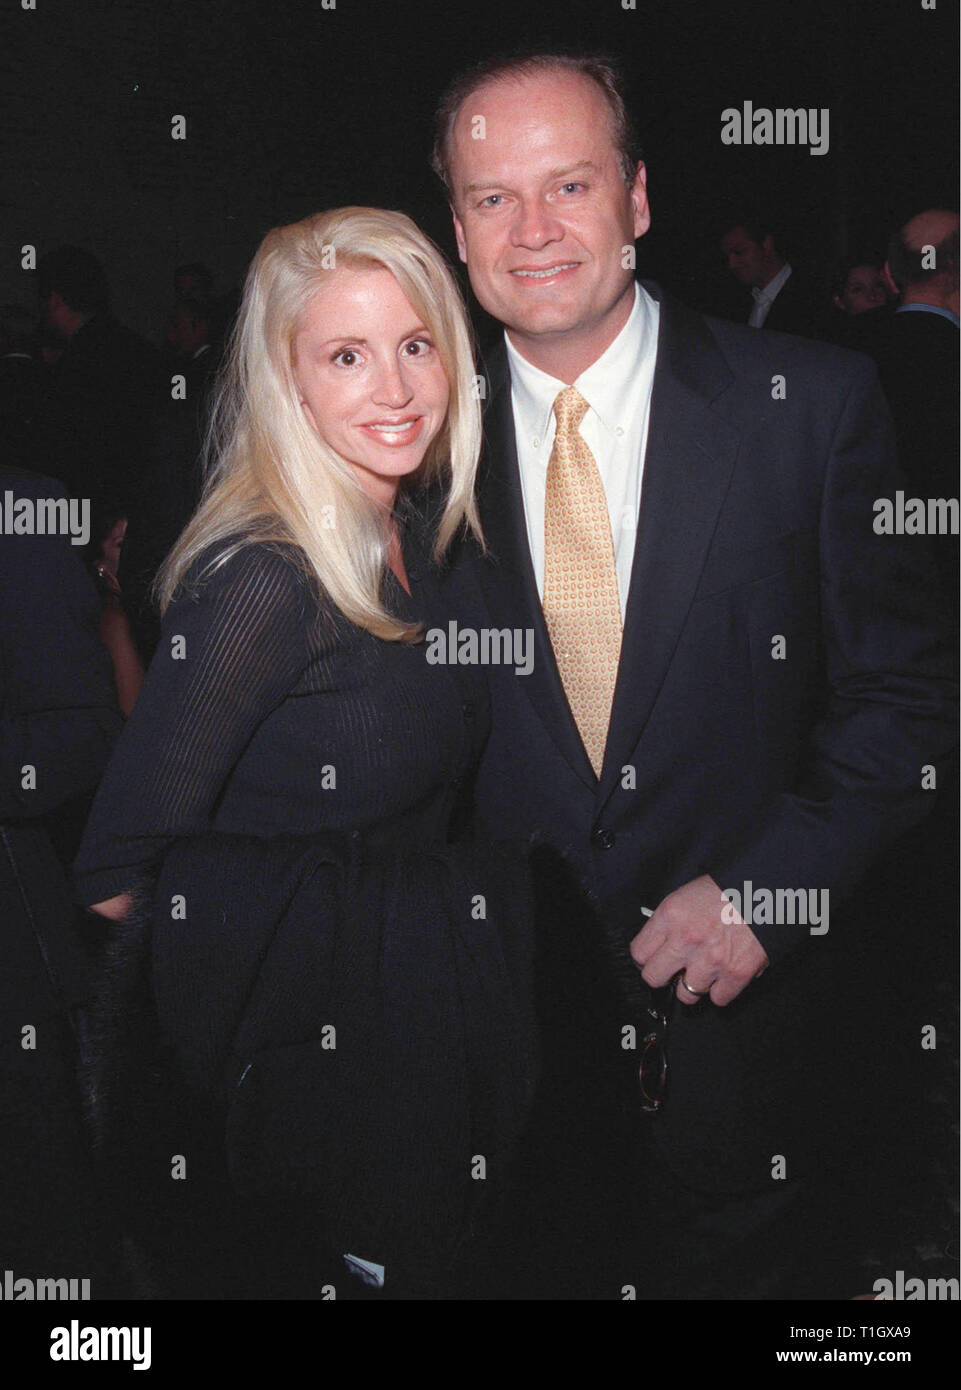 LOS ANGELES, CA - March 13, 1999: Actor KELSEY GRAMMER & wife CAMILLE GRAMMER at the opening night party for the musical 'Sweeney Todd - The Demon Barber of Fleet Street' in which he stars at the Ahmanson Theatre, Los Angeles.    © Paul Smith / Featureflash Stock Photo